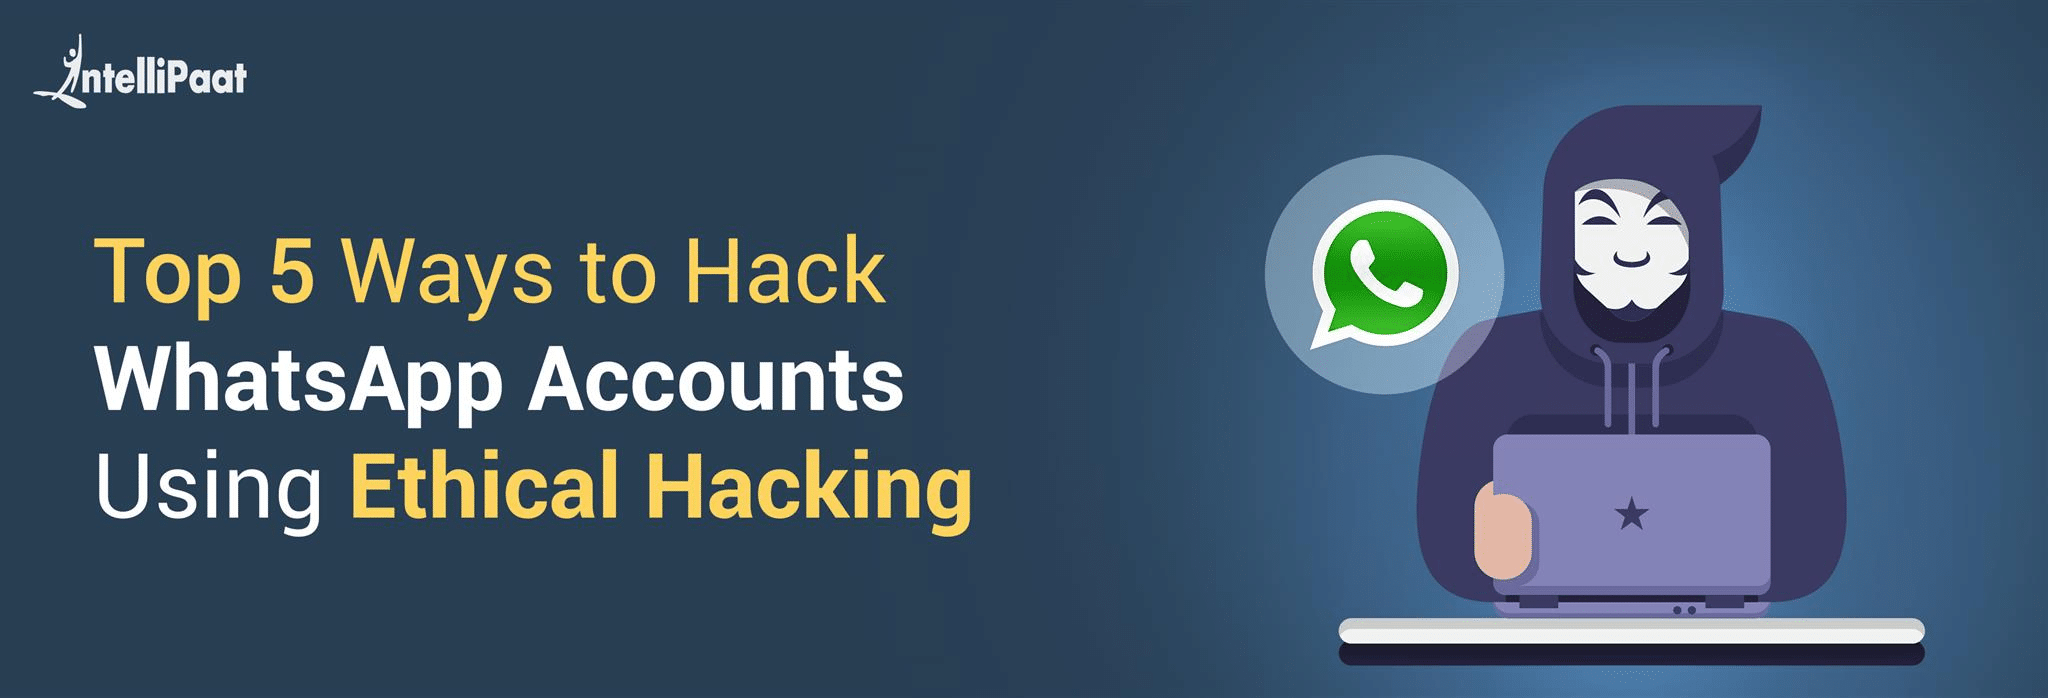 Top 5 Ways to Hack WhatsApp Accounts Using Ethical Hacking